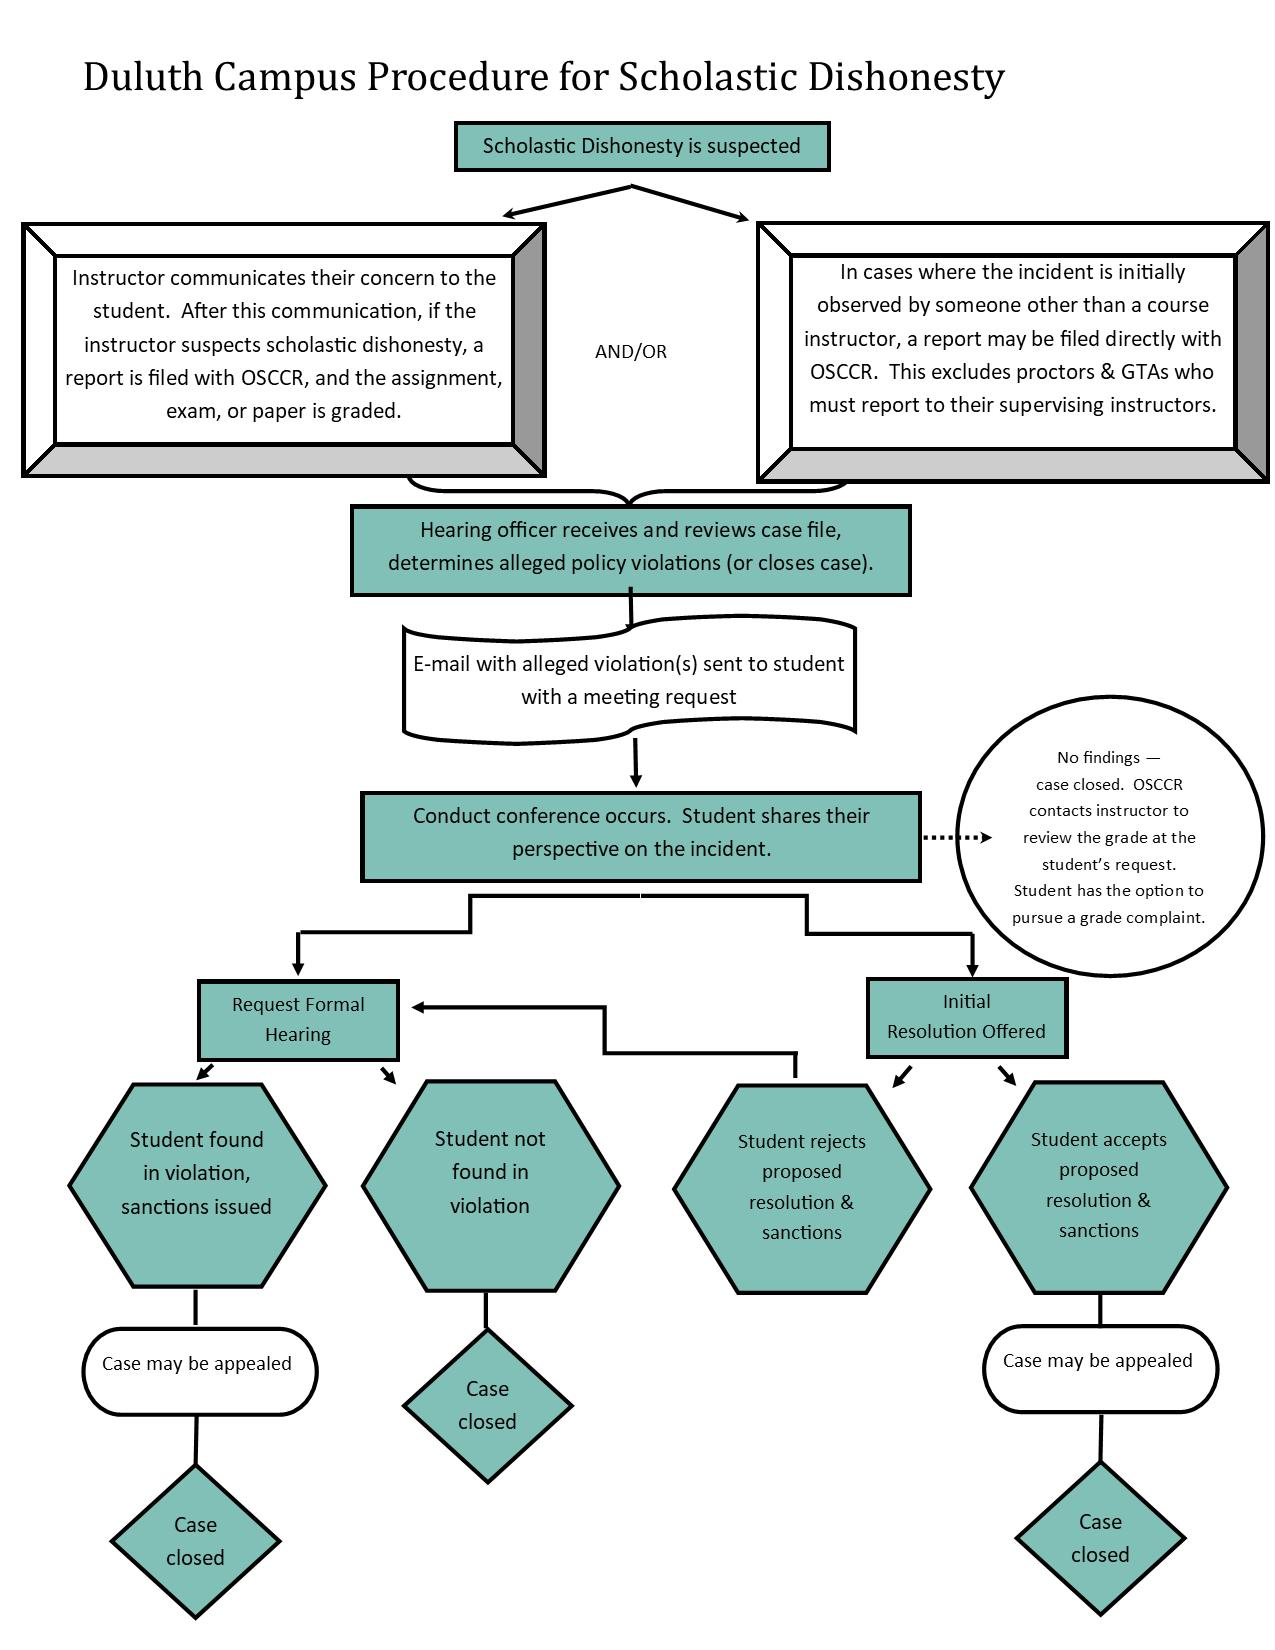 Duluth Camps Procedures for Sexual Misconduct Flow Chart (click for PDF)